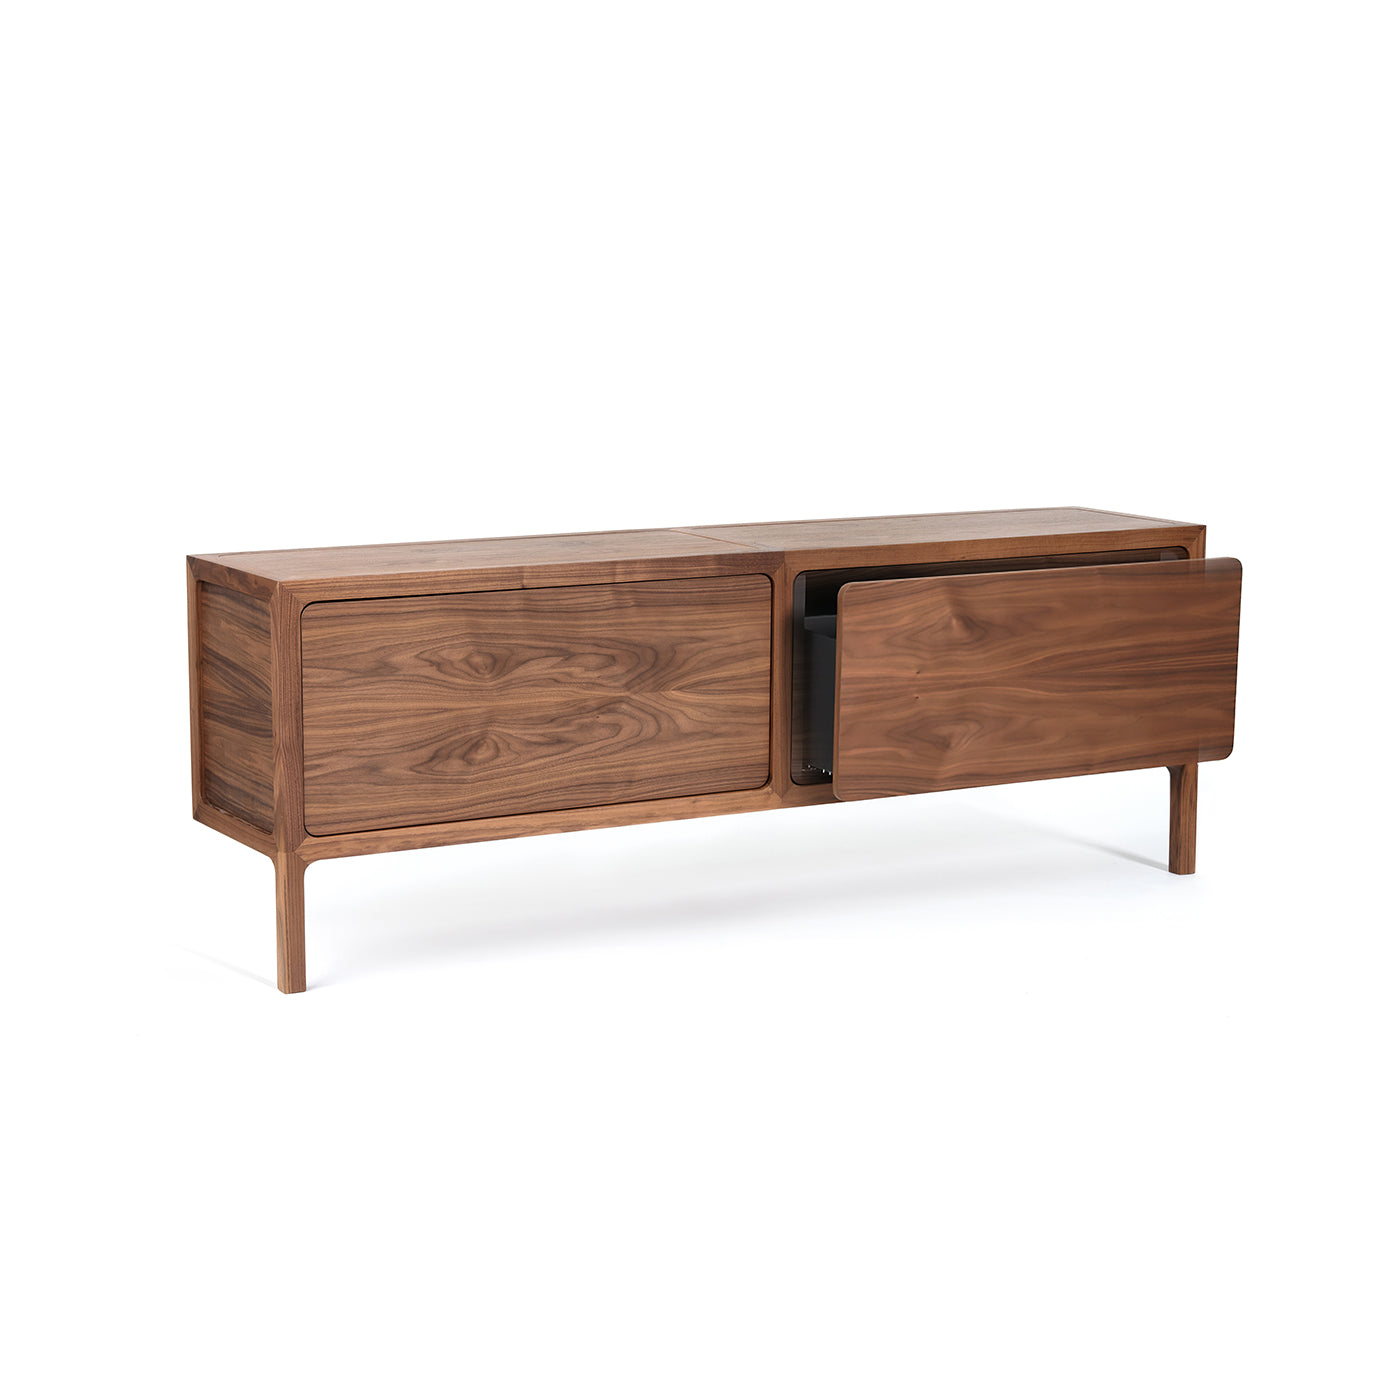 Less Sideboard with Drawers by Nicola Gisonda - Alternative view 2